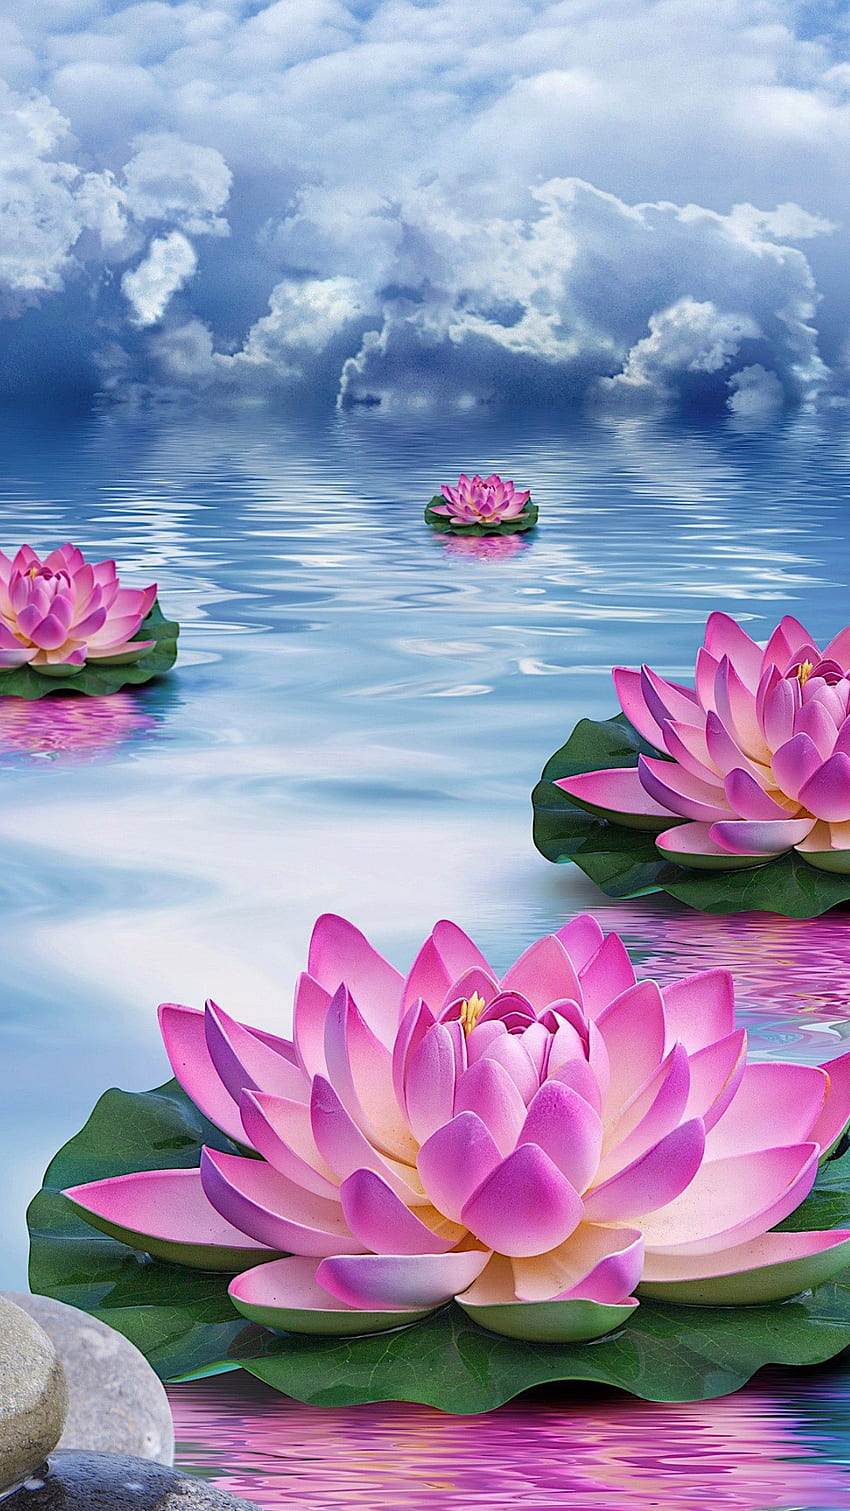 10000 Lotus Flower Pictures and Photos in HiRes  Pixabay